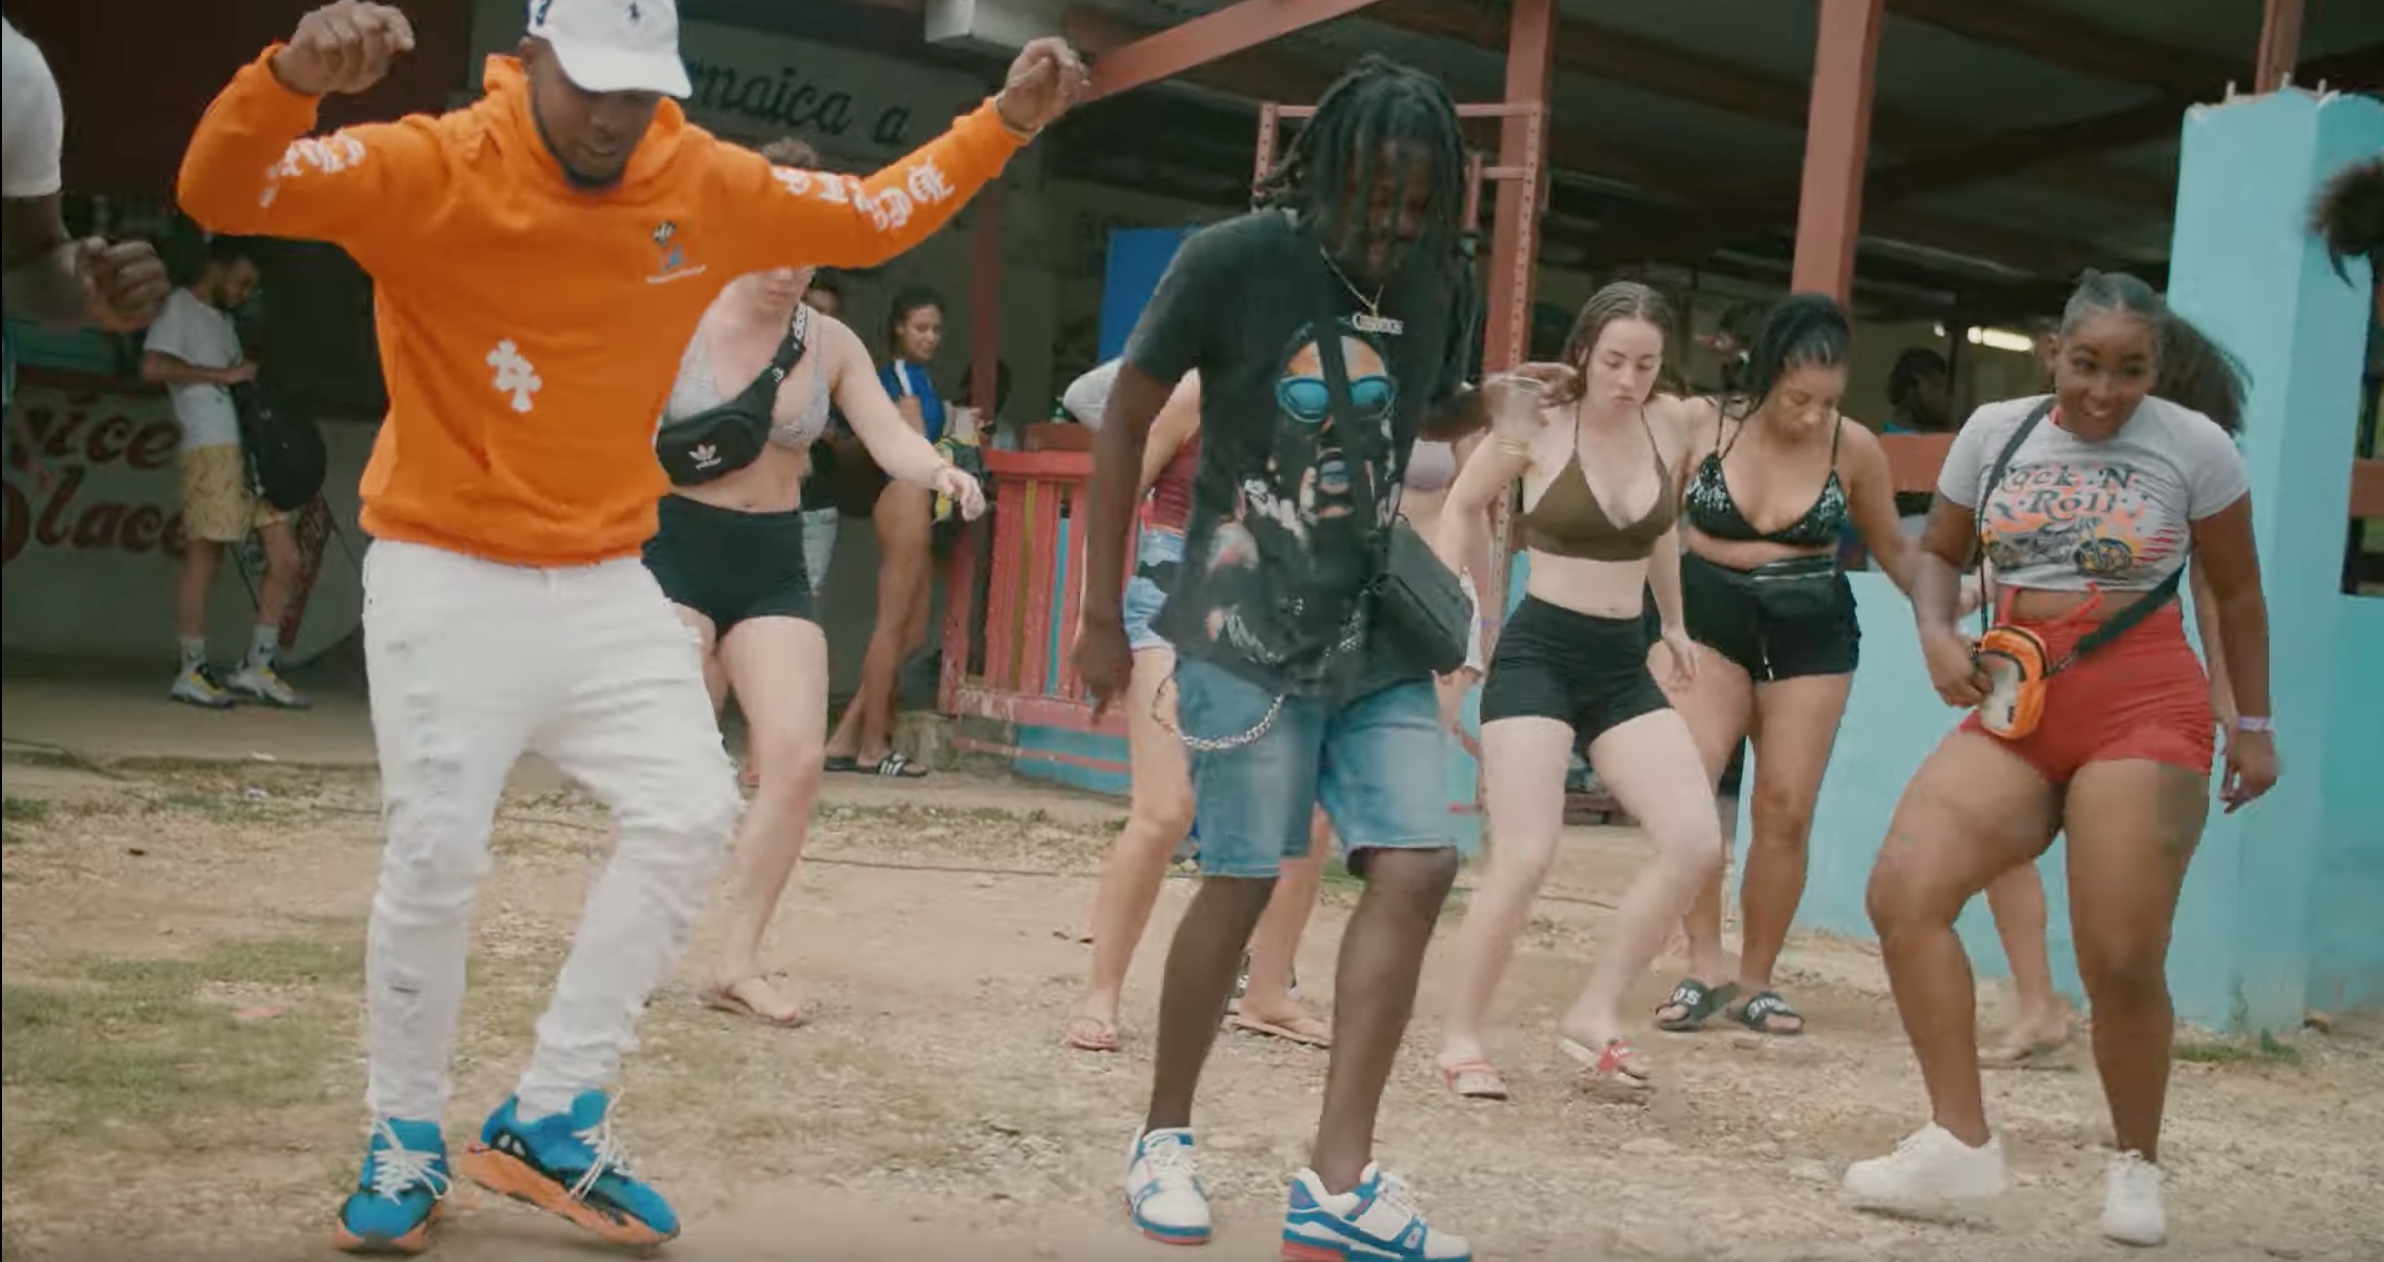 Skip Da Line Releases Song For New Dance Move “Foot Play” – YARDHYPE